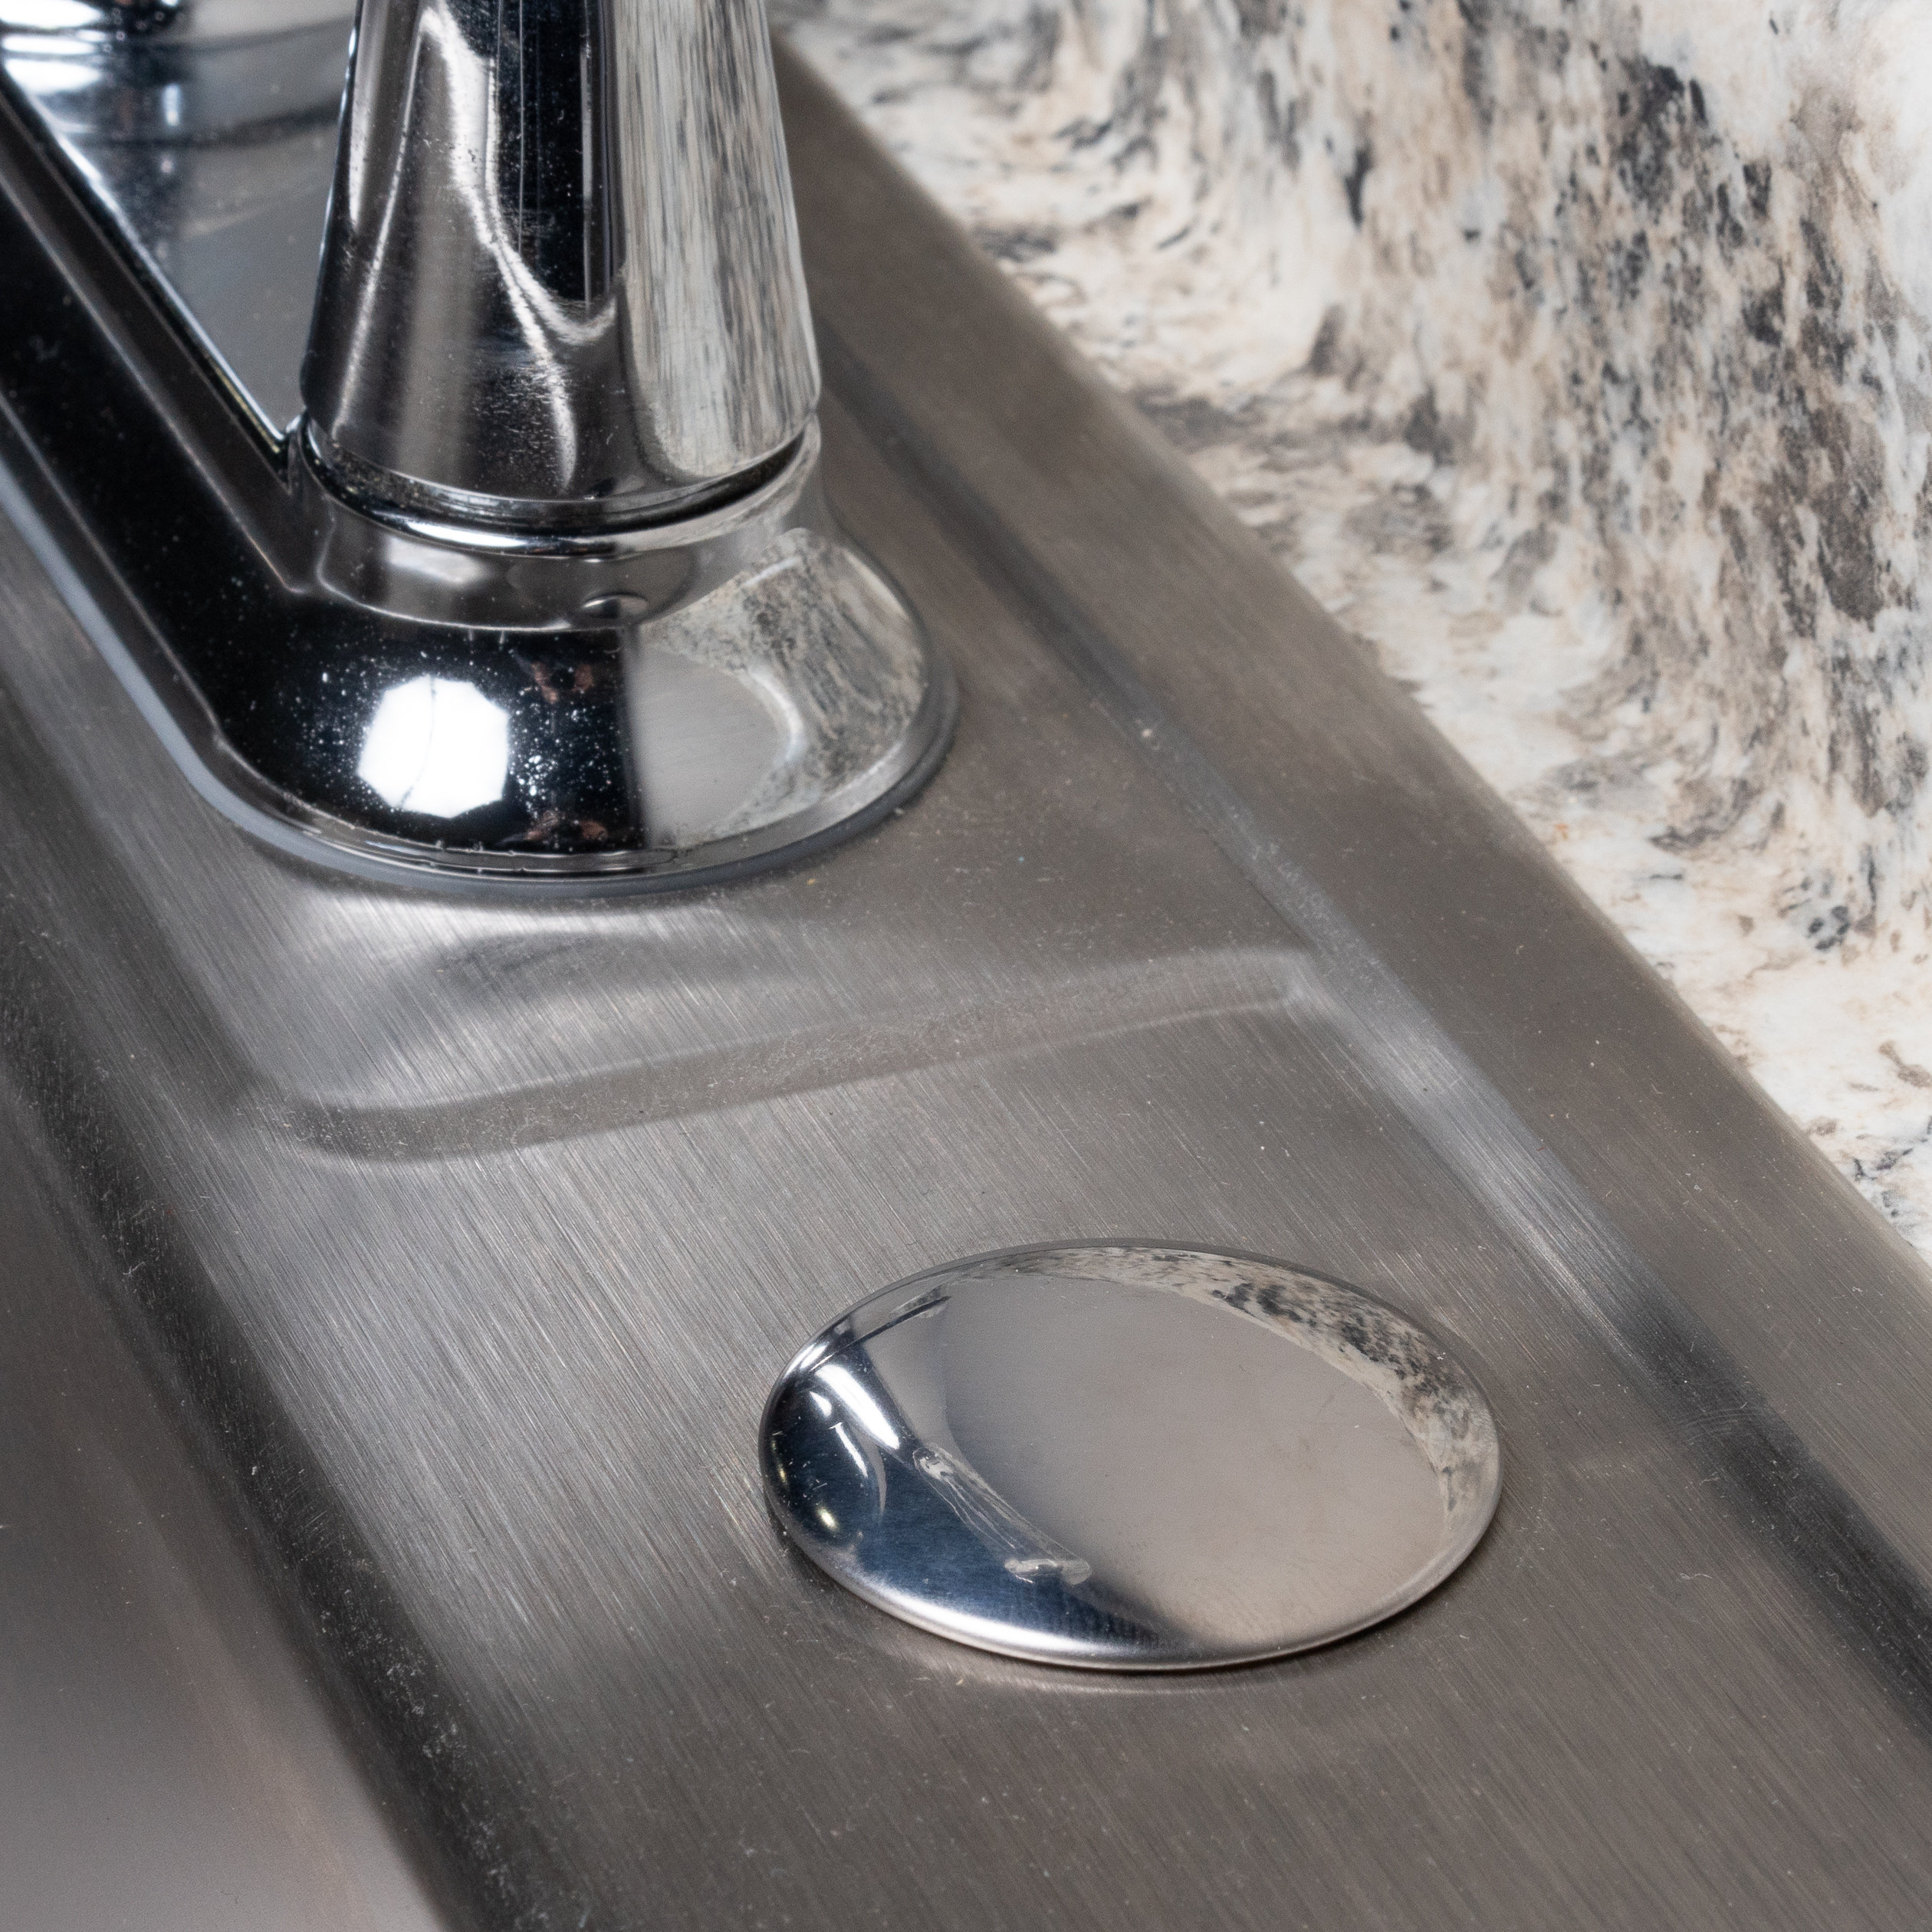 Chrome Plated Steel Faucet Spacer Over the Sink Shelf with Cutlery